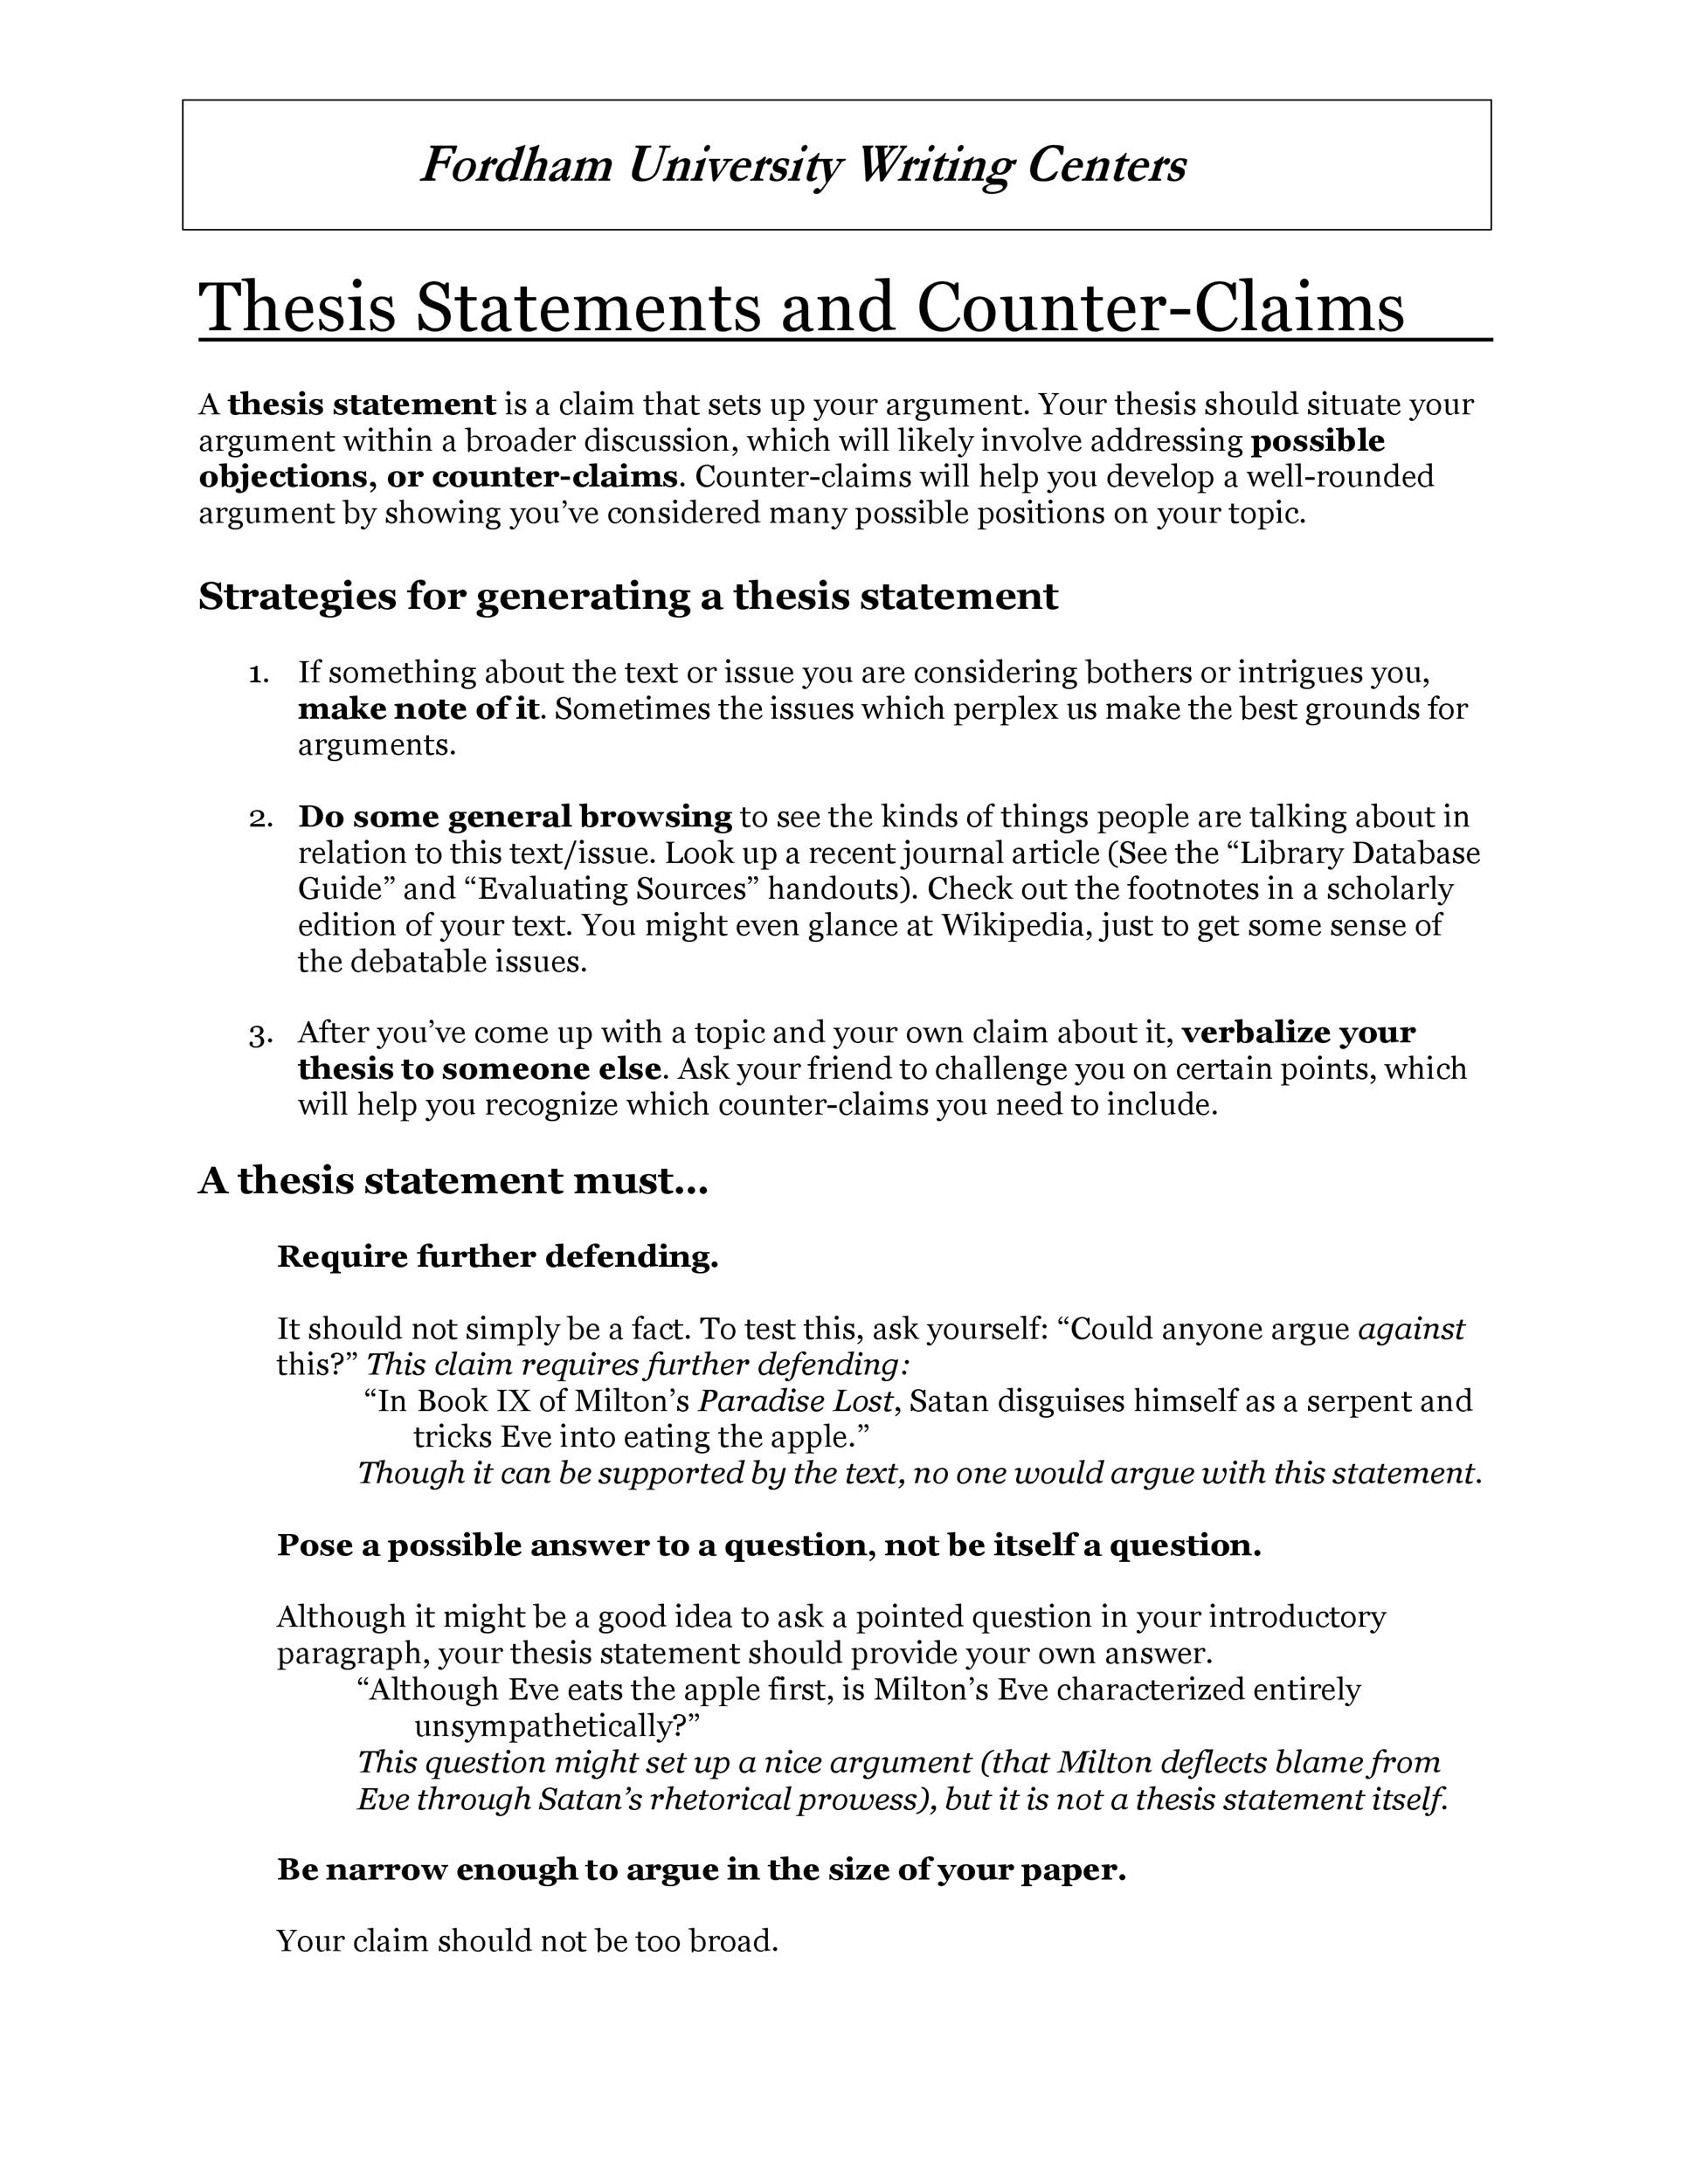 how to present thesis statement